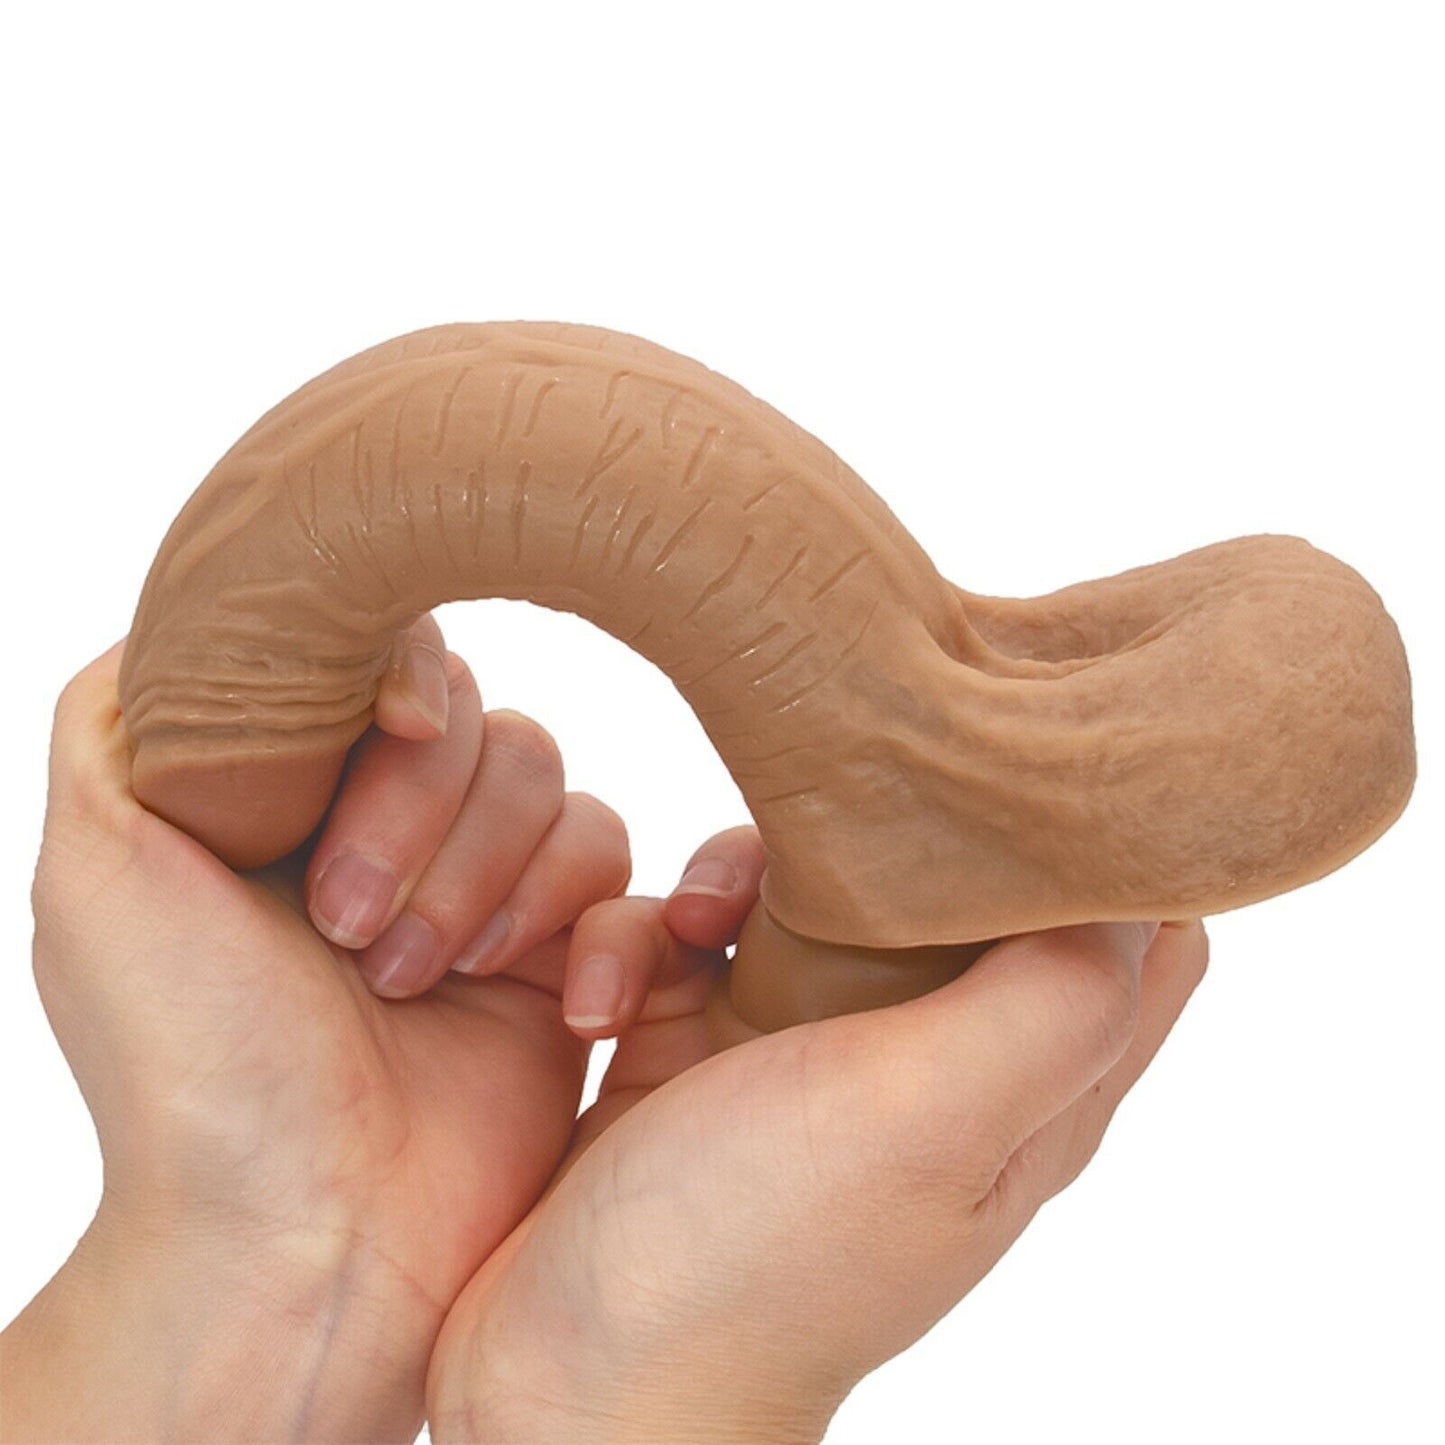 7.3" Realistic Dildo Dong Penis Big Cock Suction Cup Head Balls Adult Sex Toy